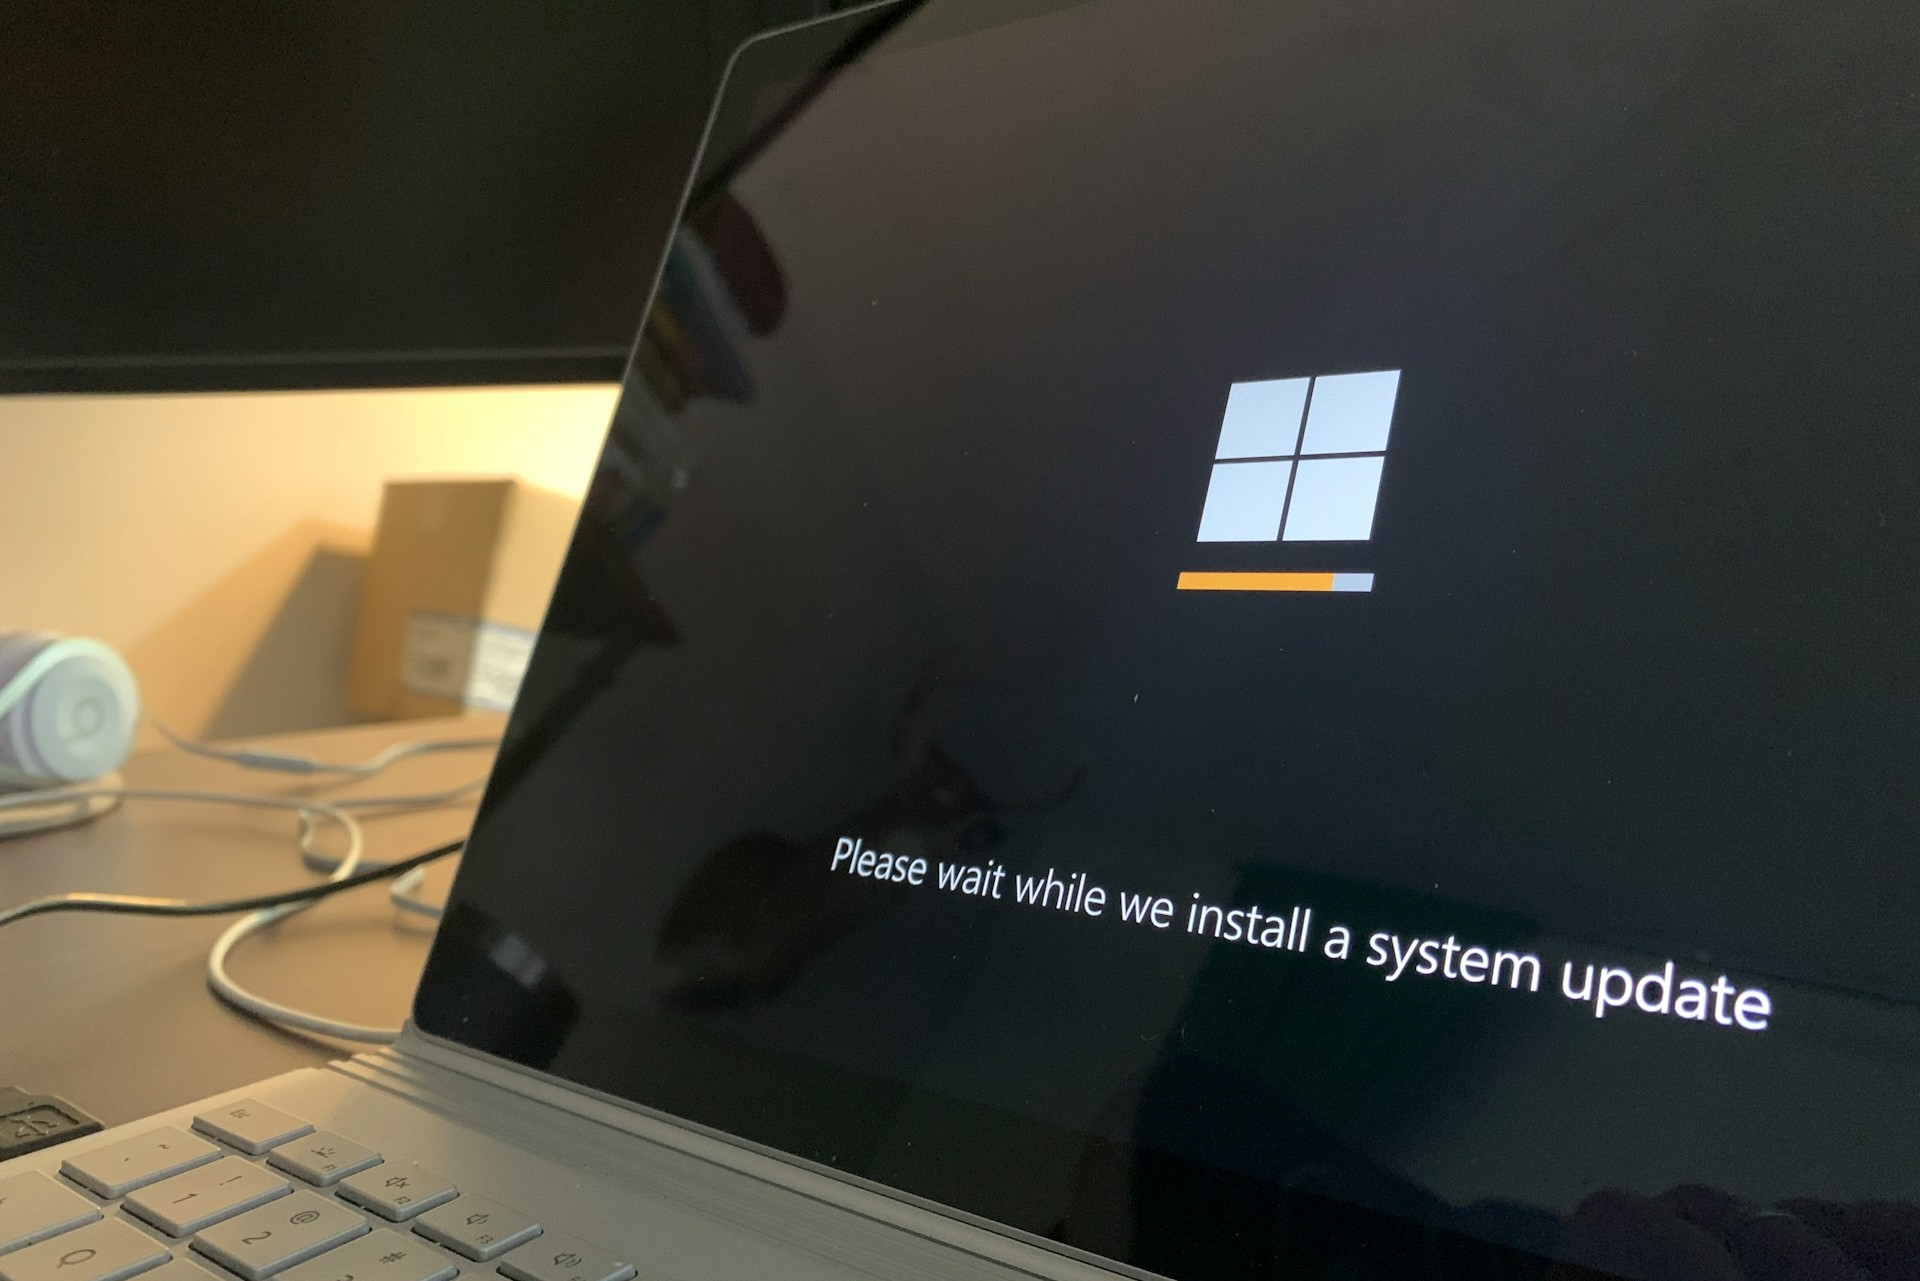 Windows 10 Extended Security Update details